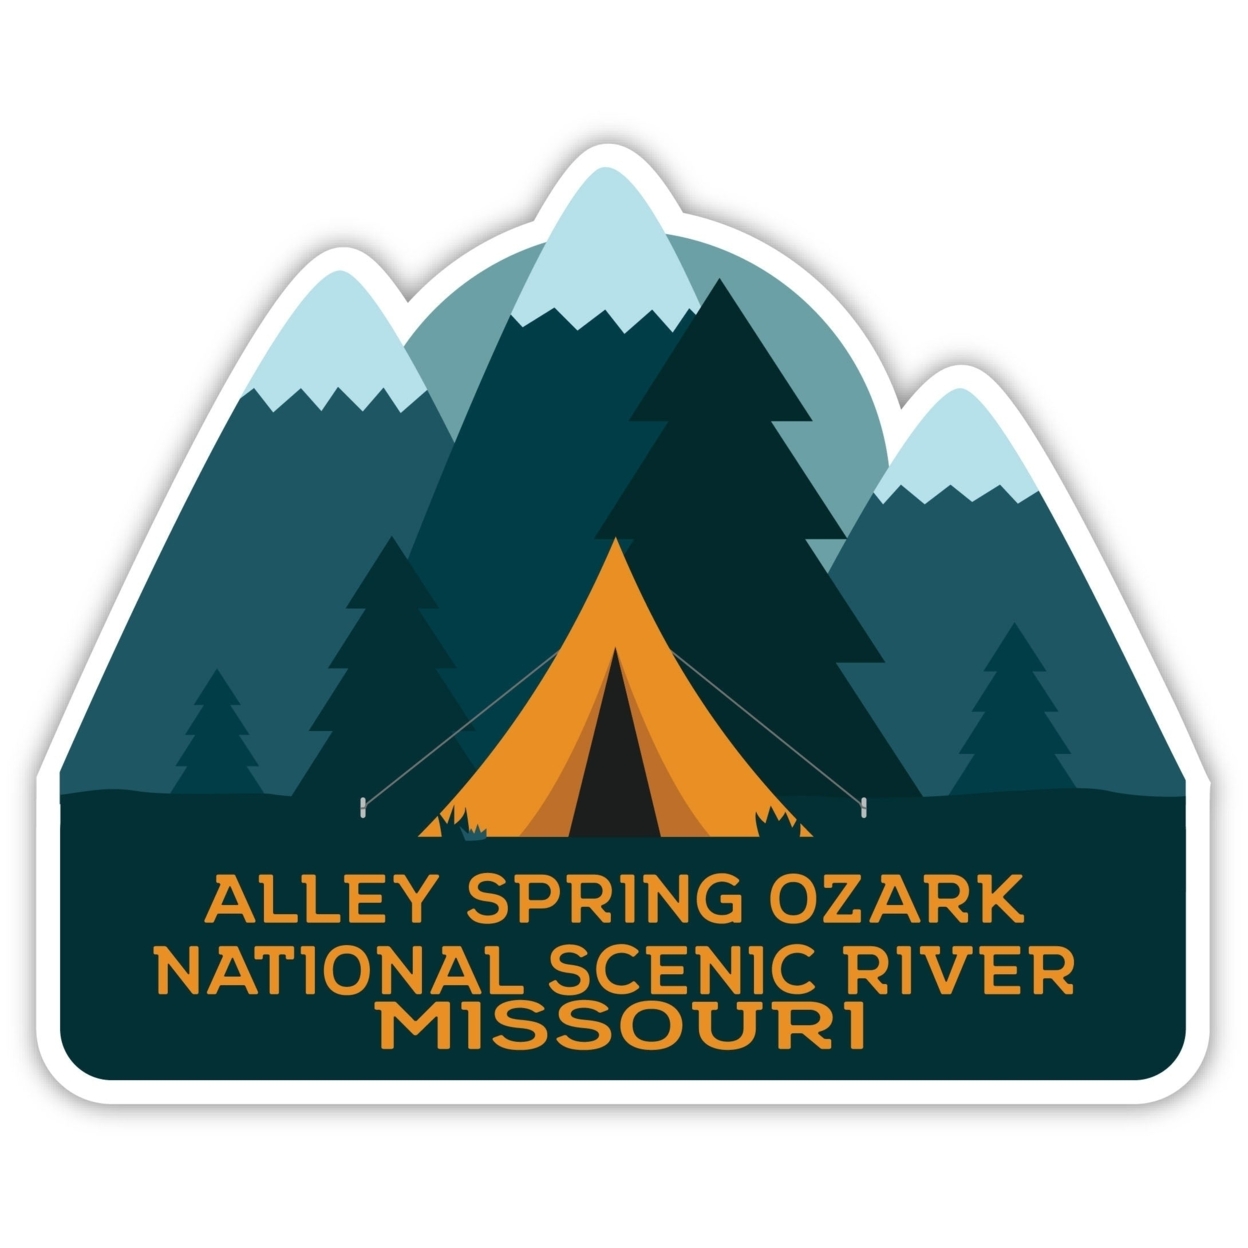 Alley Spring Ozark National Scenic River Missouri Souvenir Decorative Stickers (Choose Theme And Size) - 4-Pack, 8-Inch, Tent